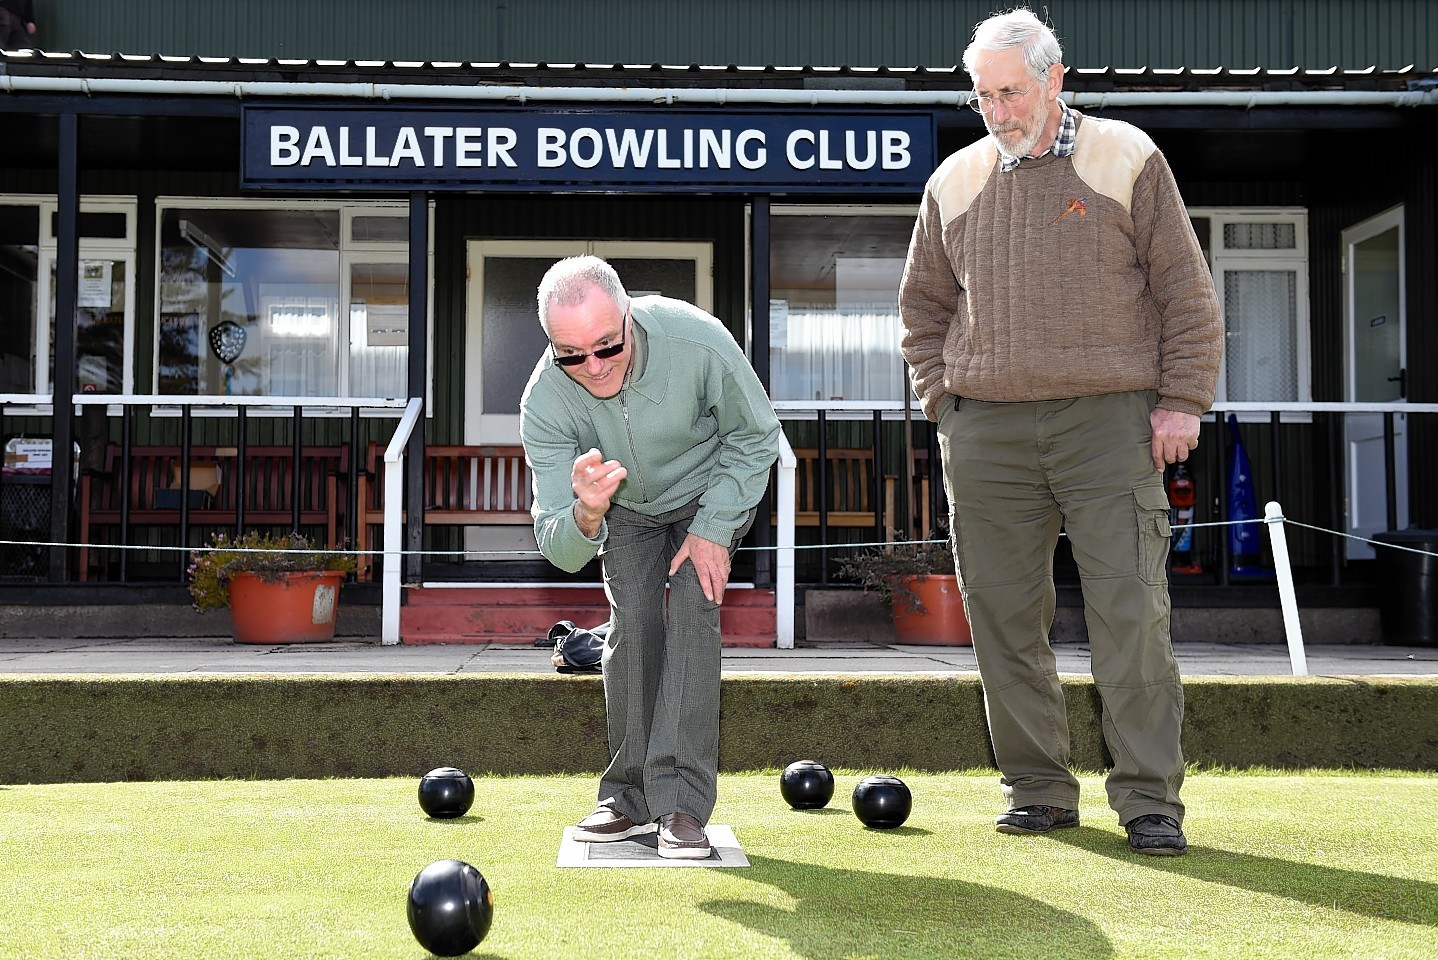 Ballater Bowling Club is re-opening on Sunday 